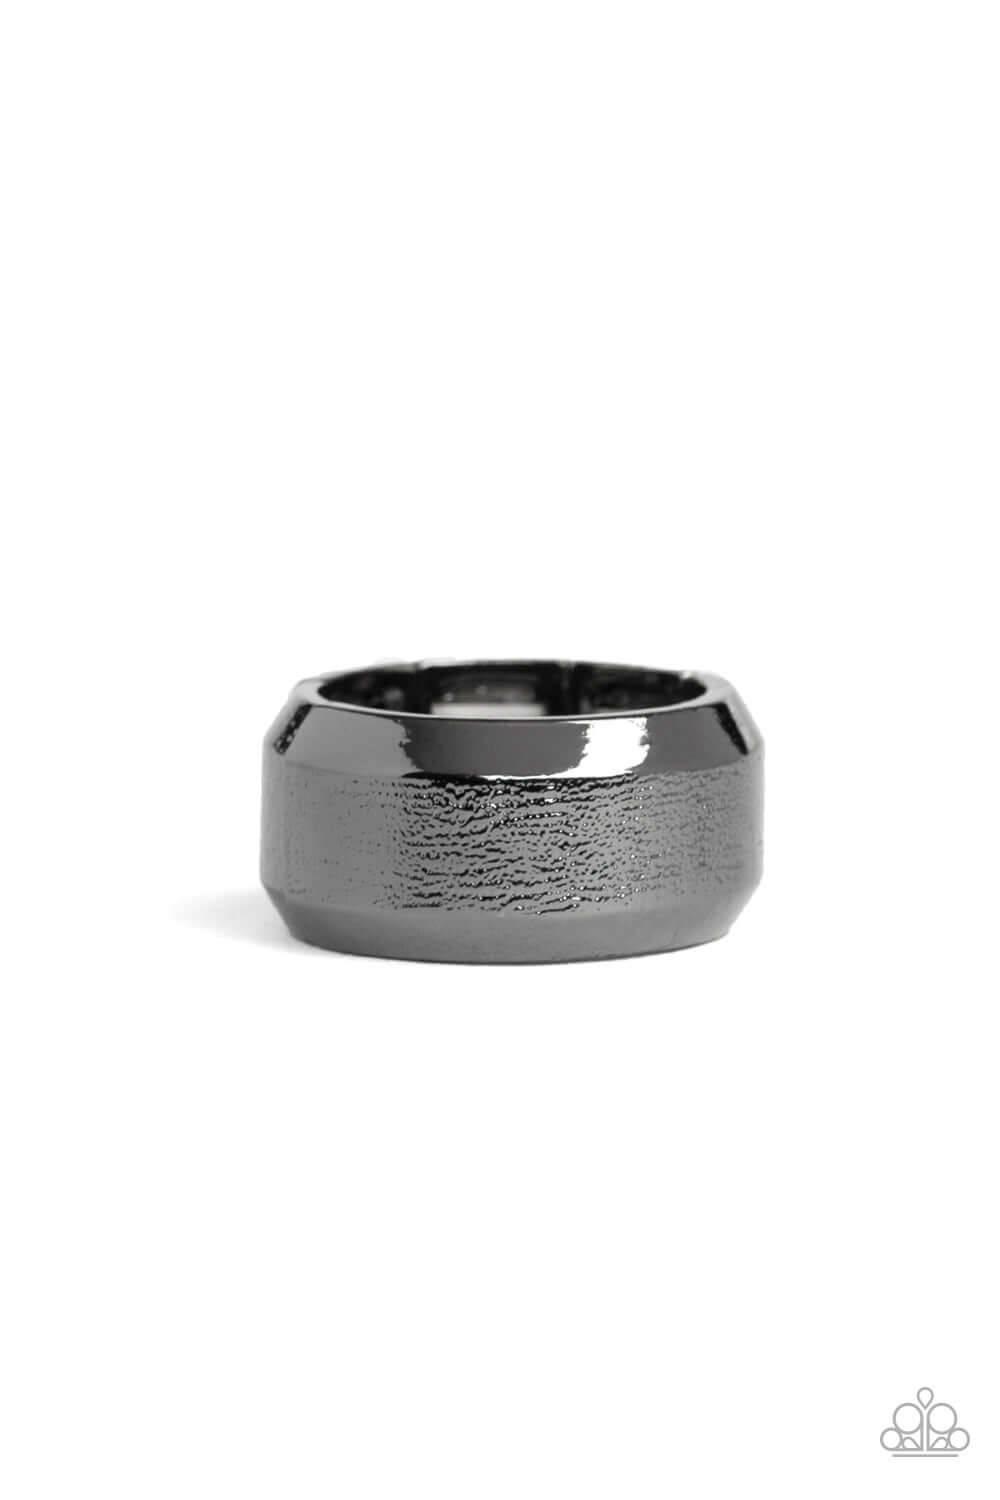 Checkmate - Black Urban Ring - TheMasterCollection